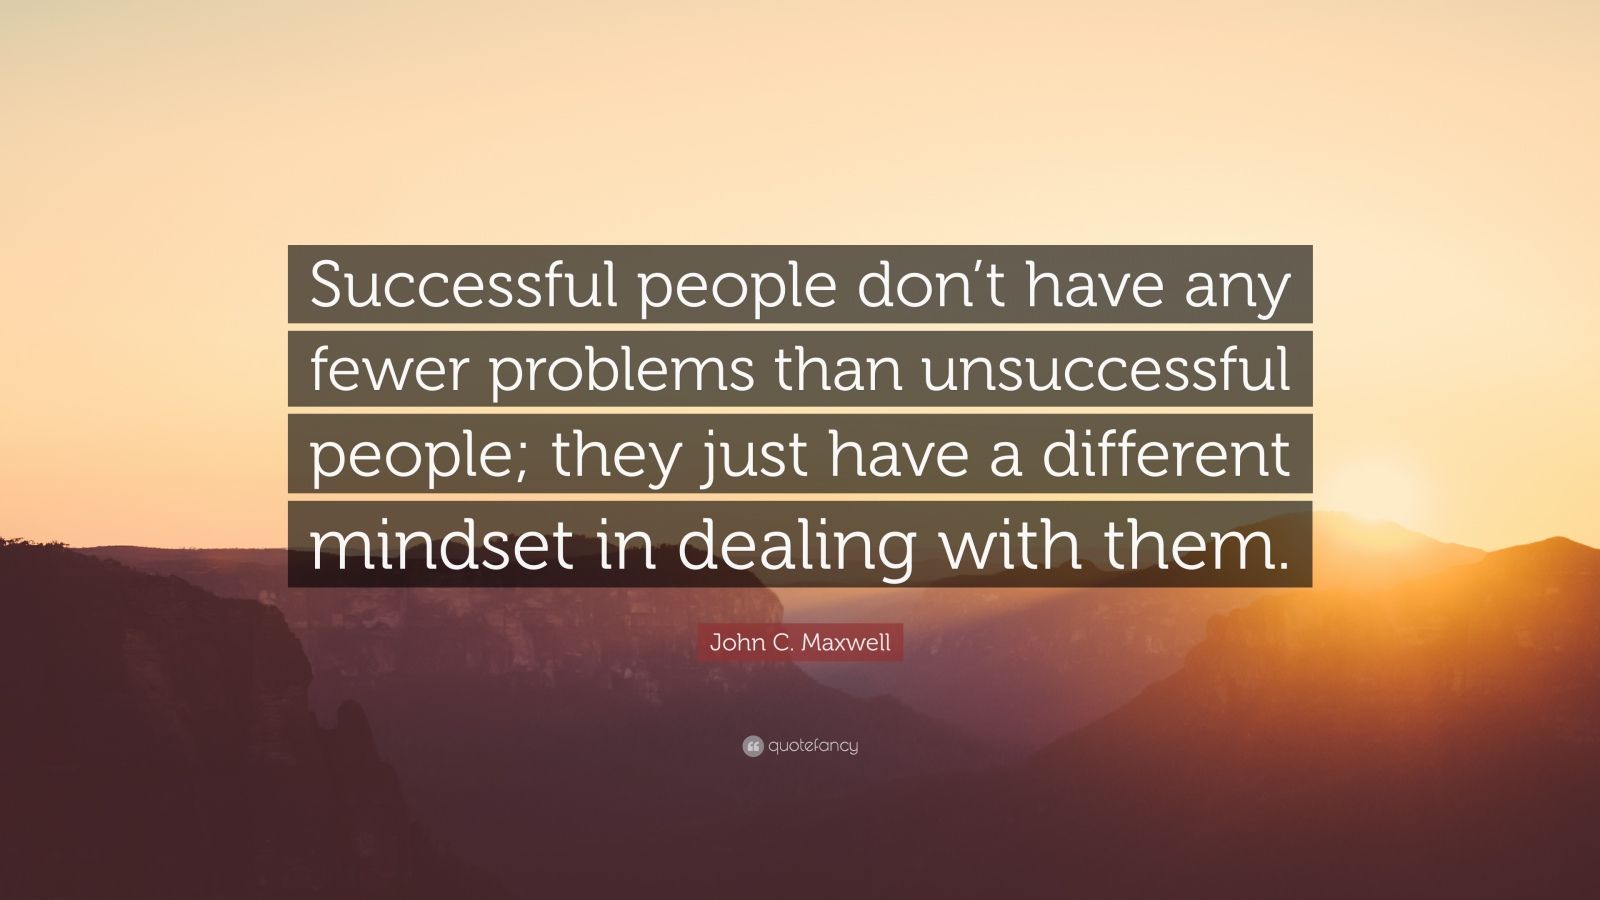 John C. Maxwell Quote: “Successful people don’t have any fewer problems ...